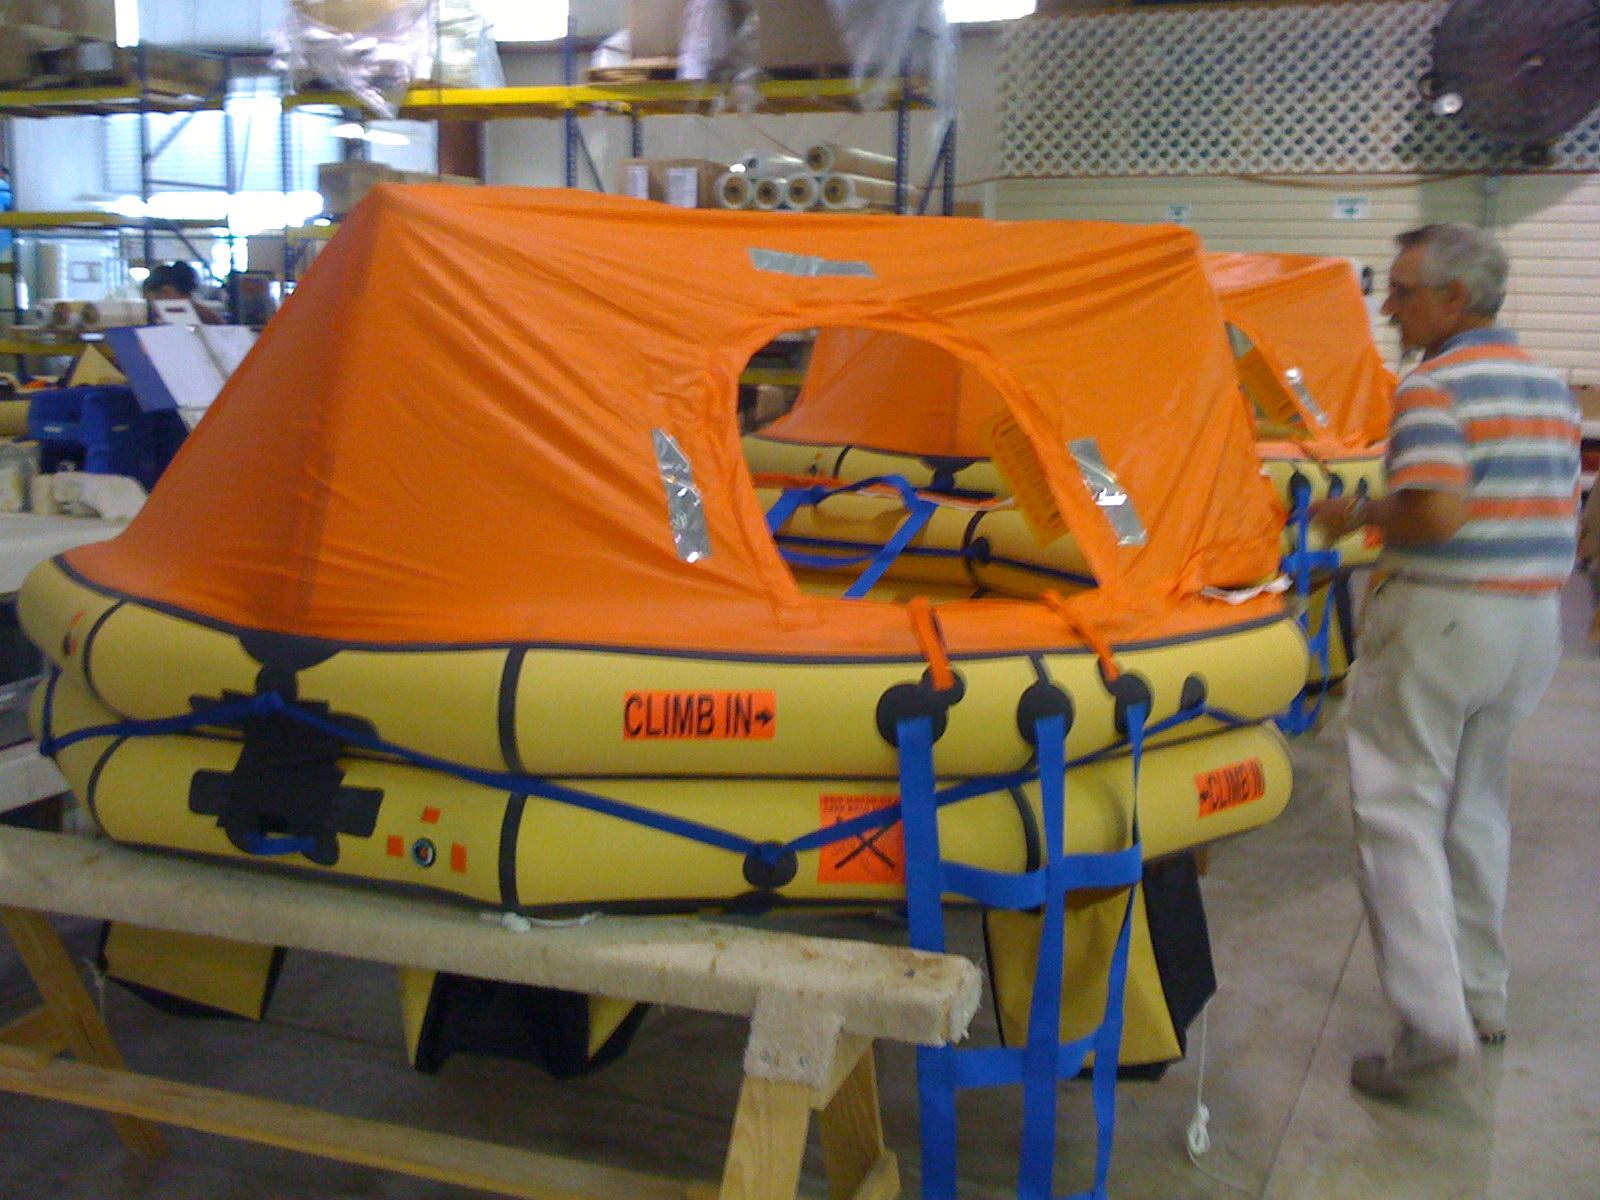 Winslow raft with canopy fully deployed